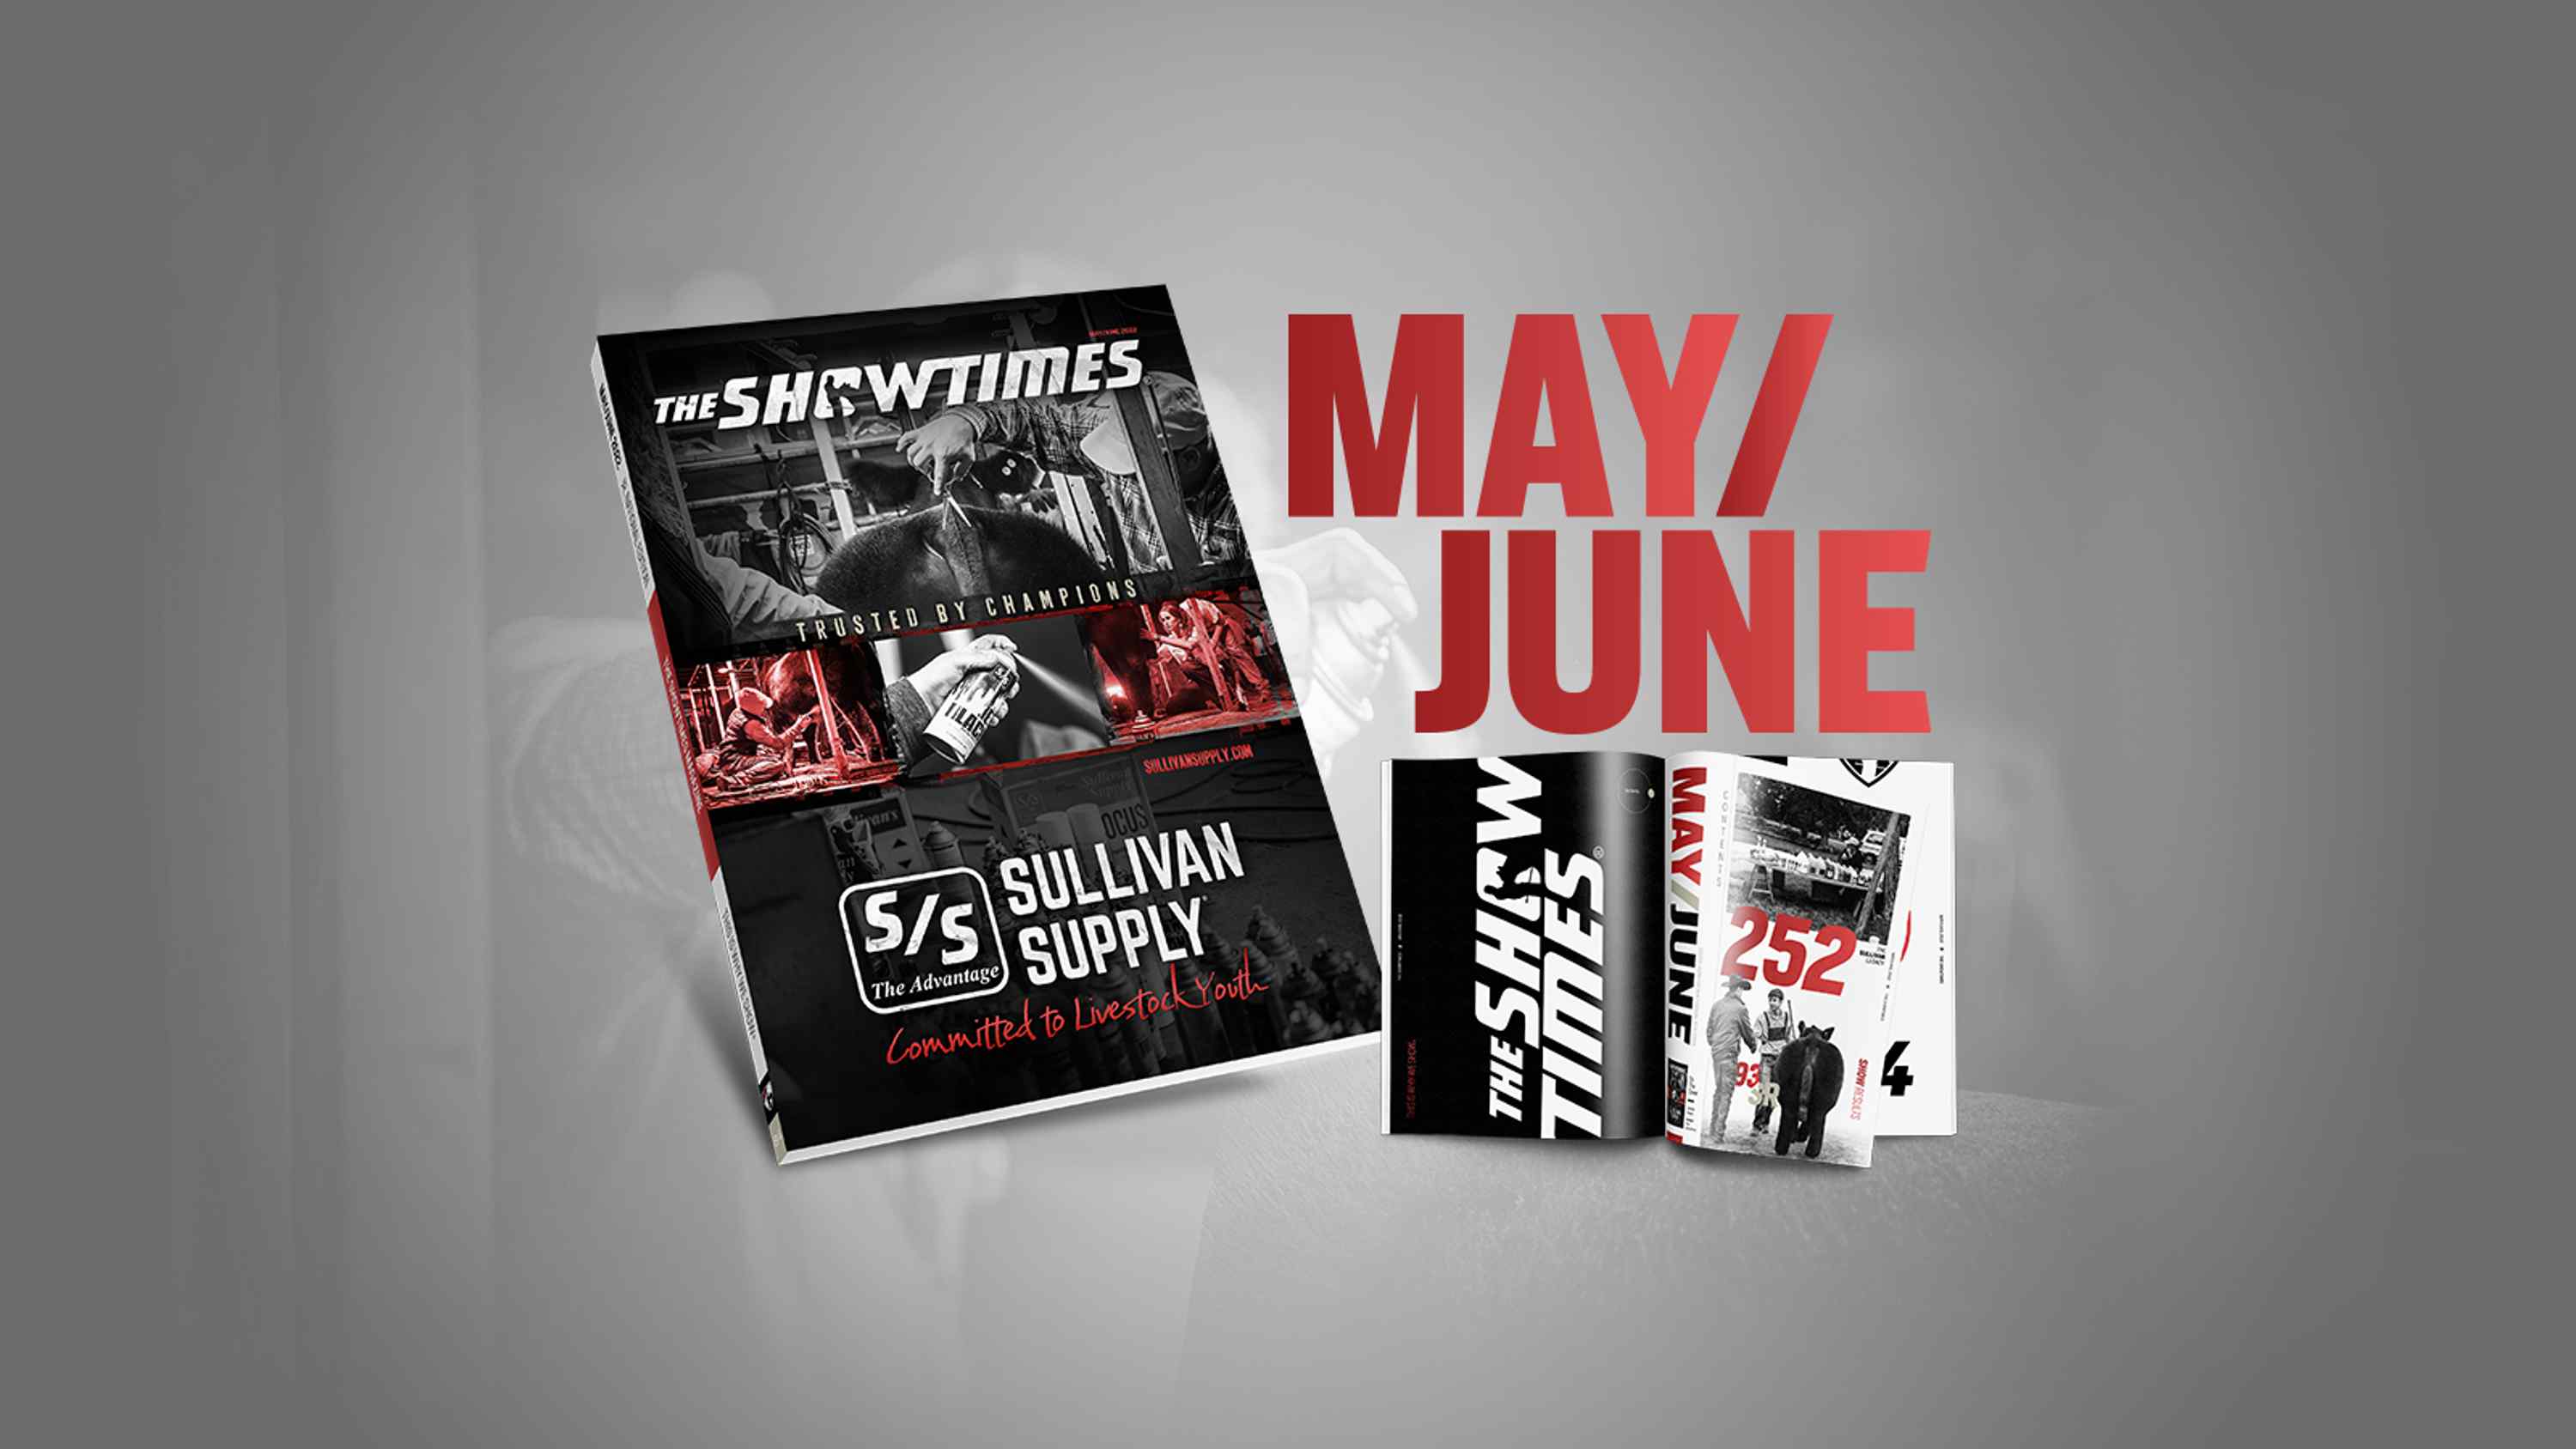 May/June Now Available